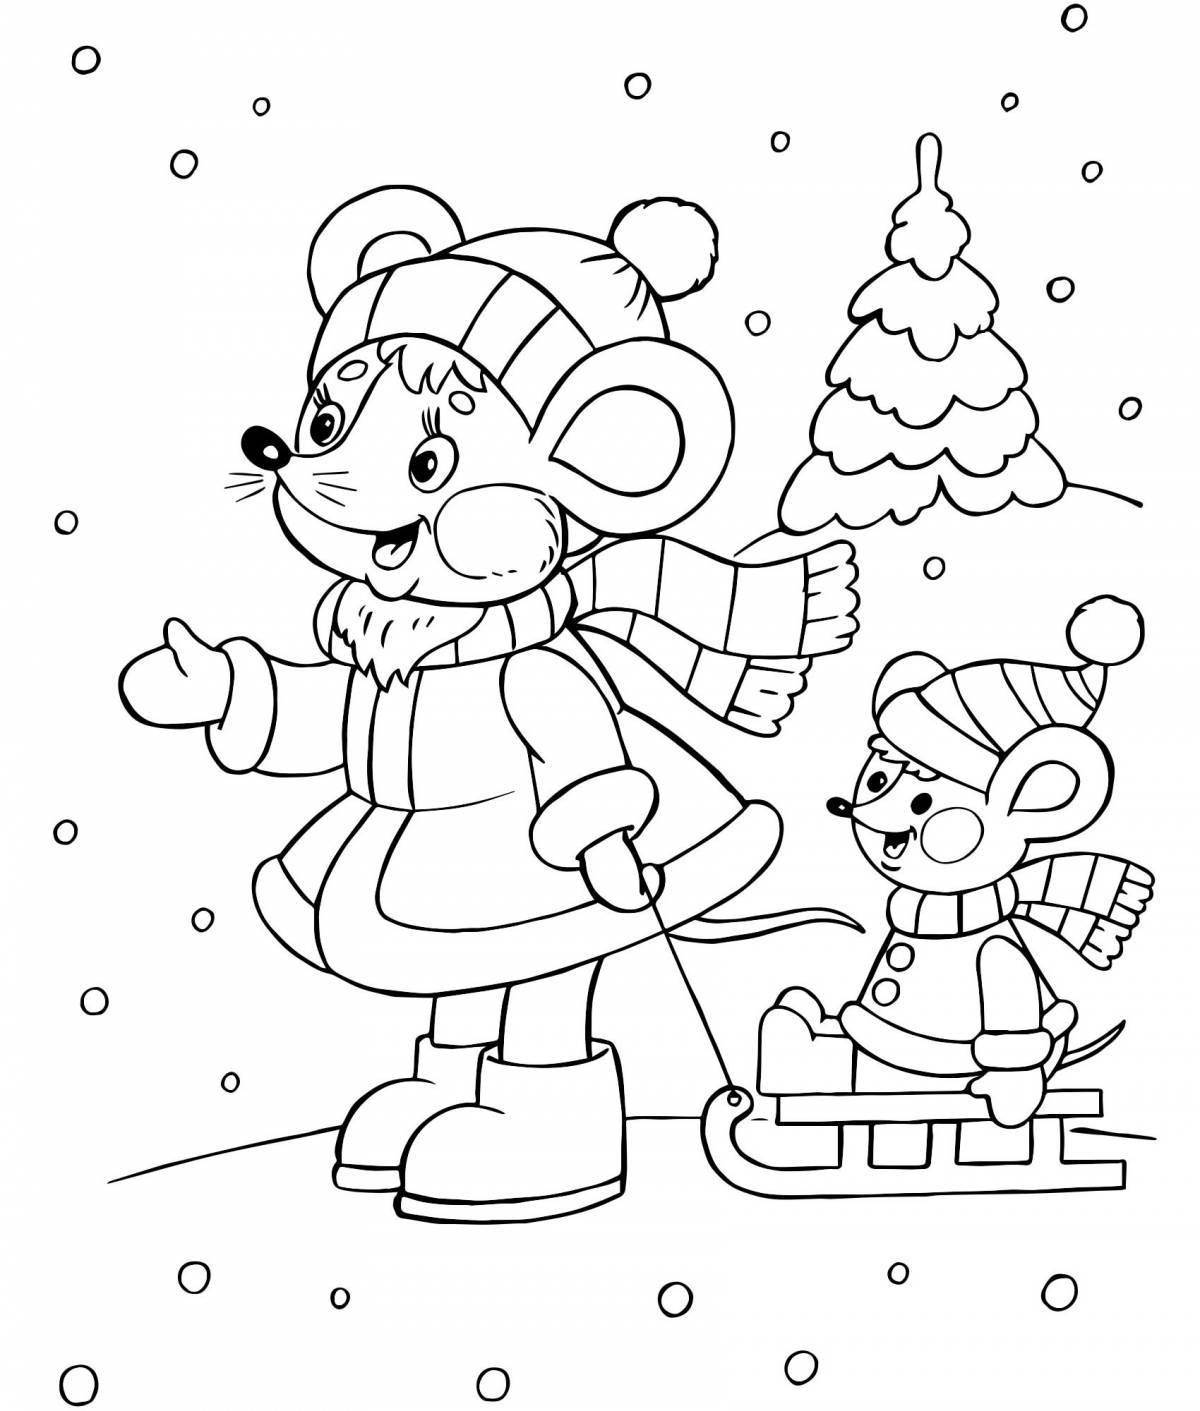 Fantastic winter coloring pages for kids